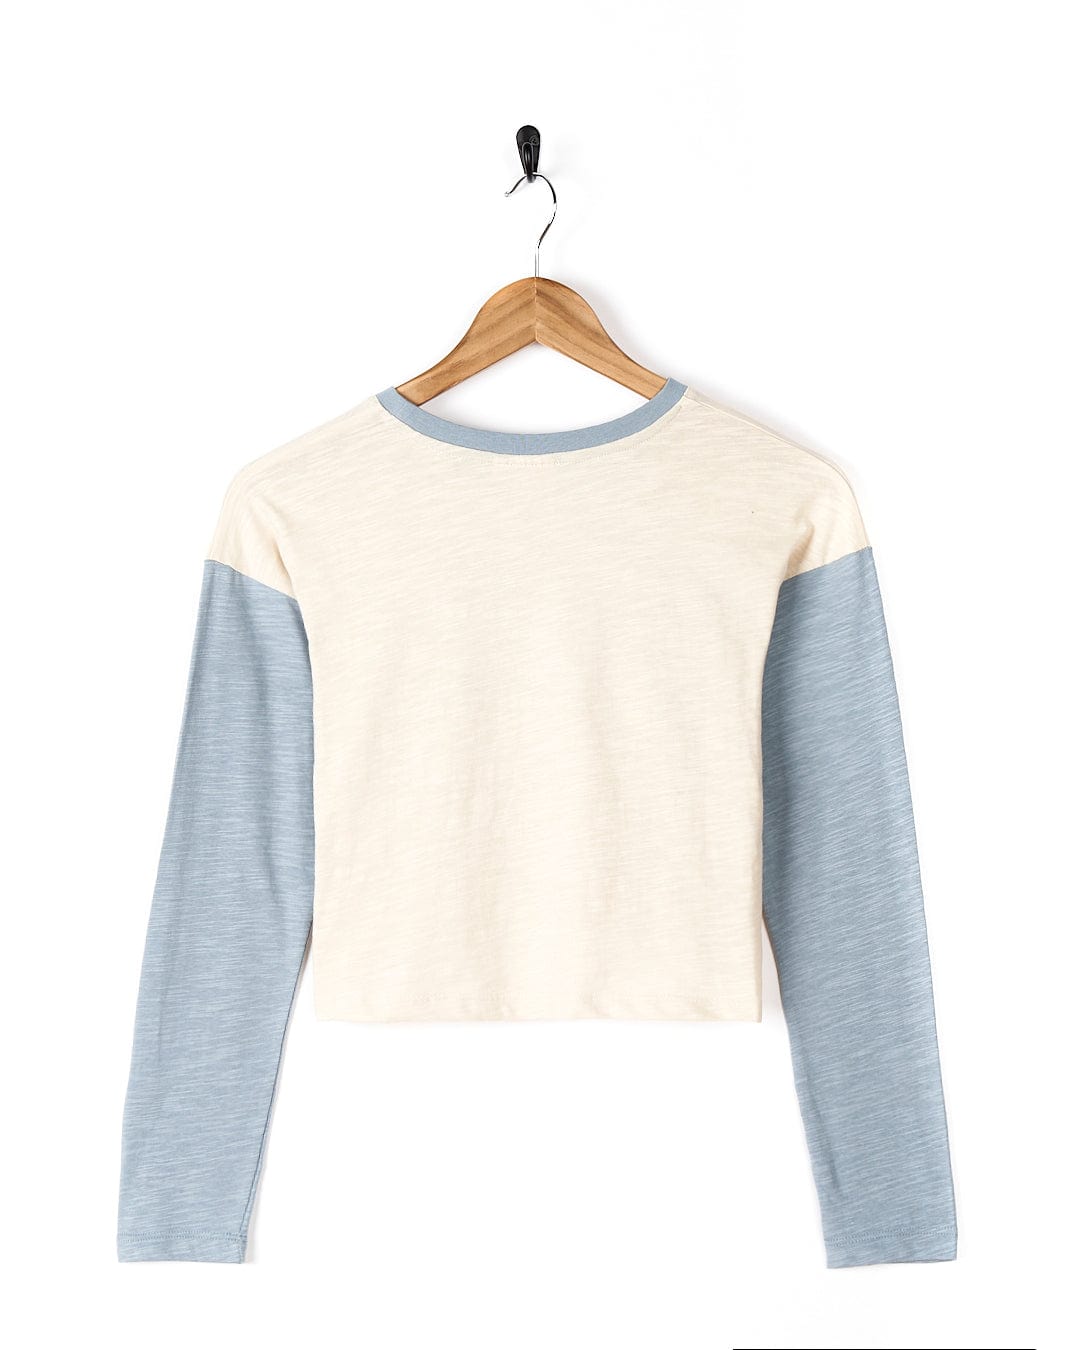 A comfortable Meadow - Kids Long Sleeve Cropped T-Shirt - Cream with blue sleeves by Saltrock.